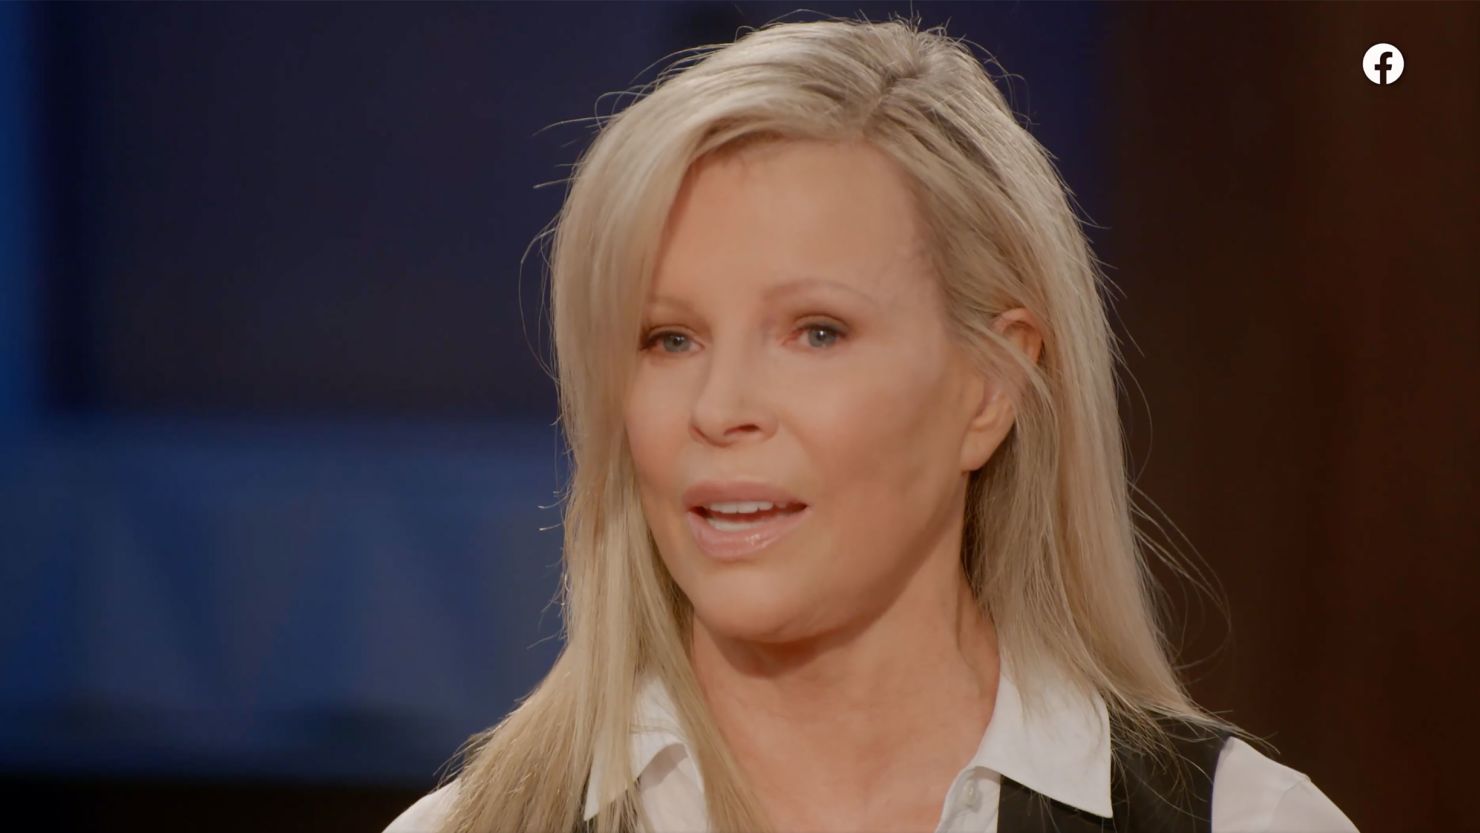 Kim Basinger, in her first interview in 14 years, appeared on "Red Table Talk" to discuss how her severe anxiety caused her to resist leaving her home. 